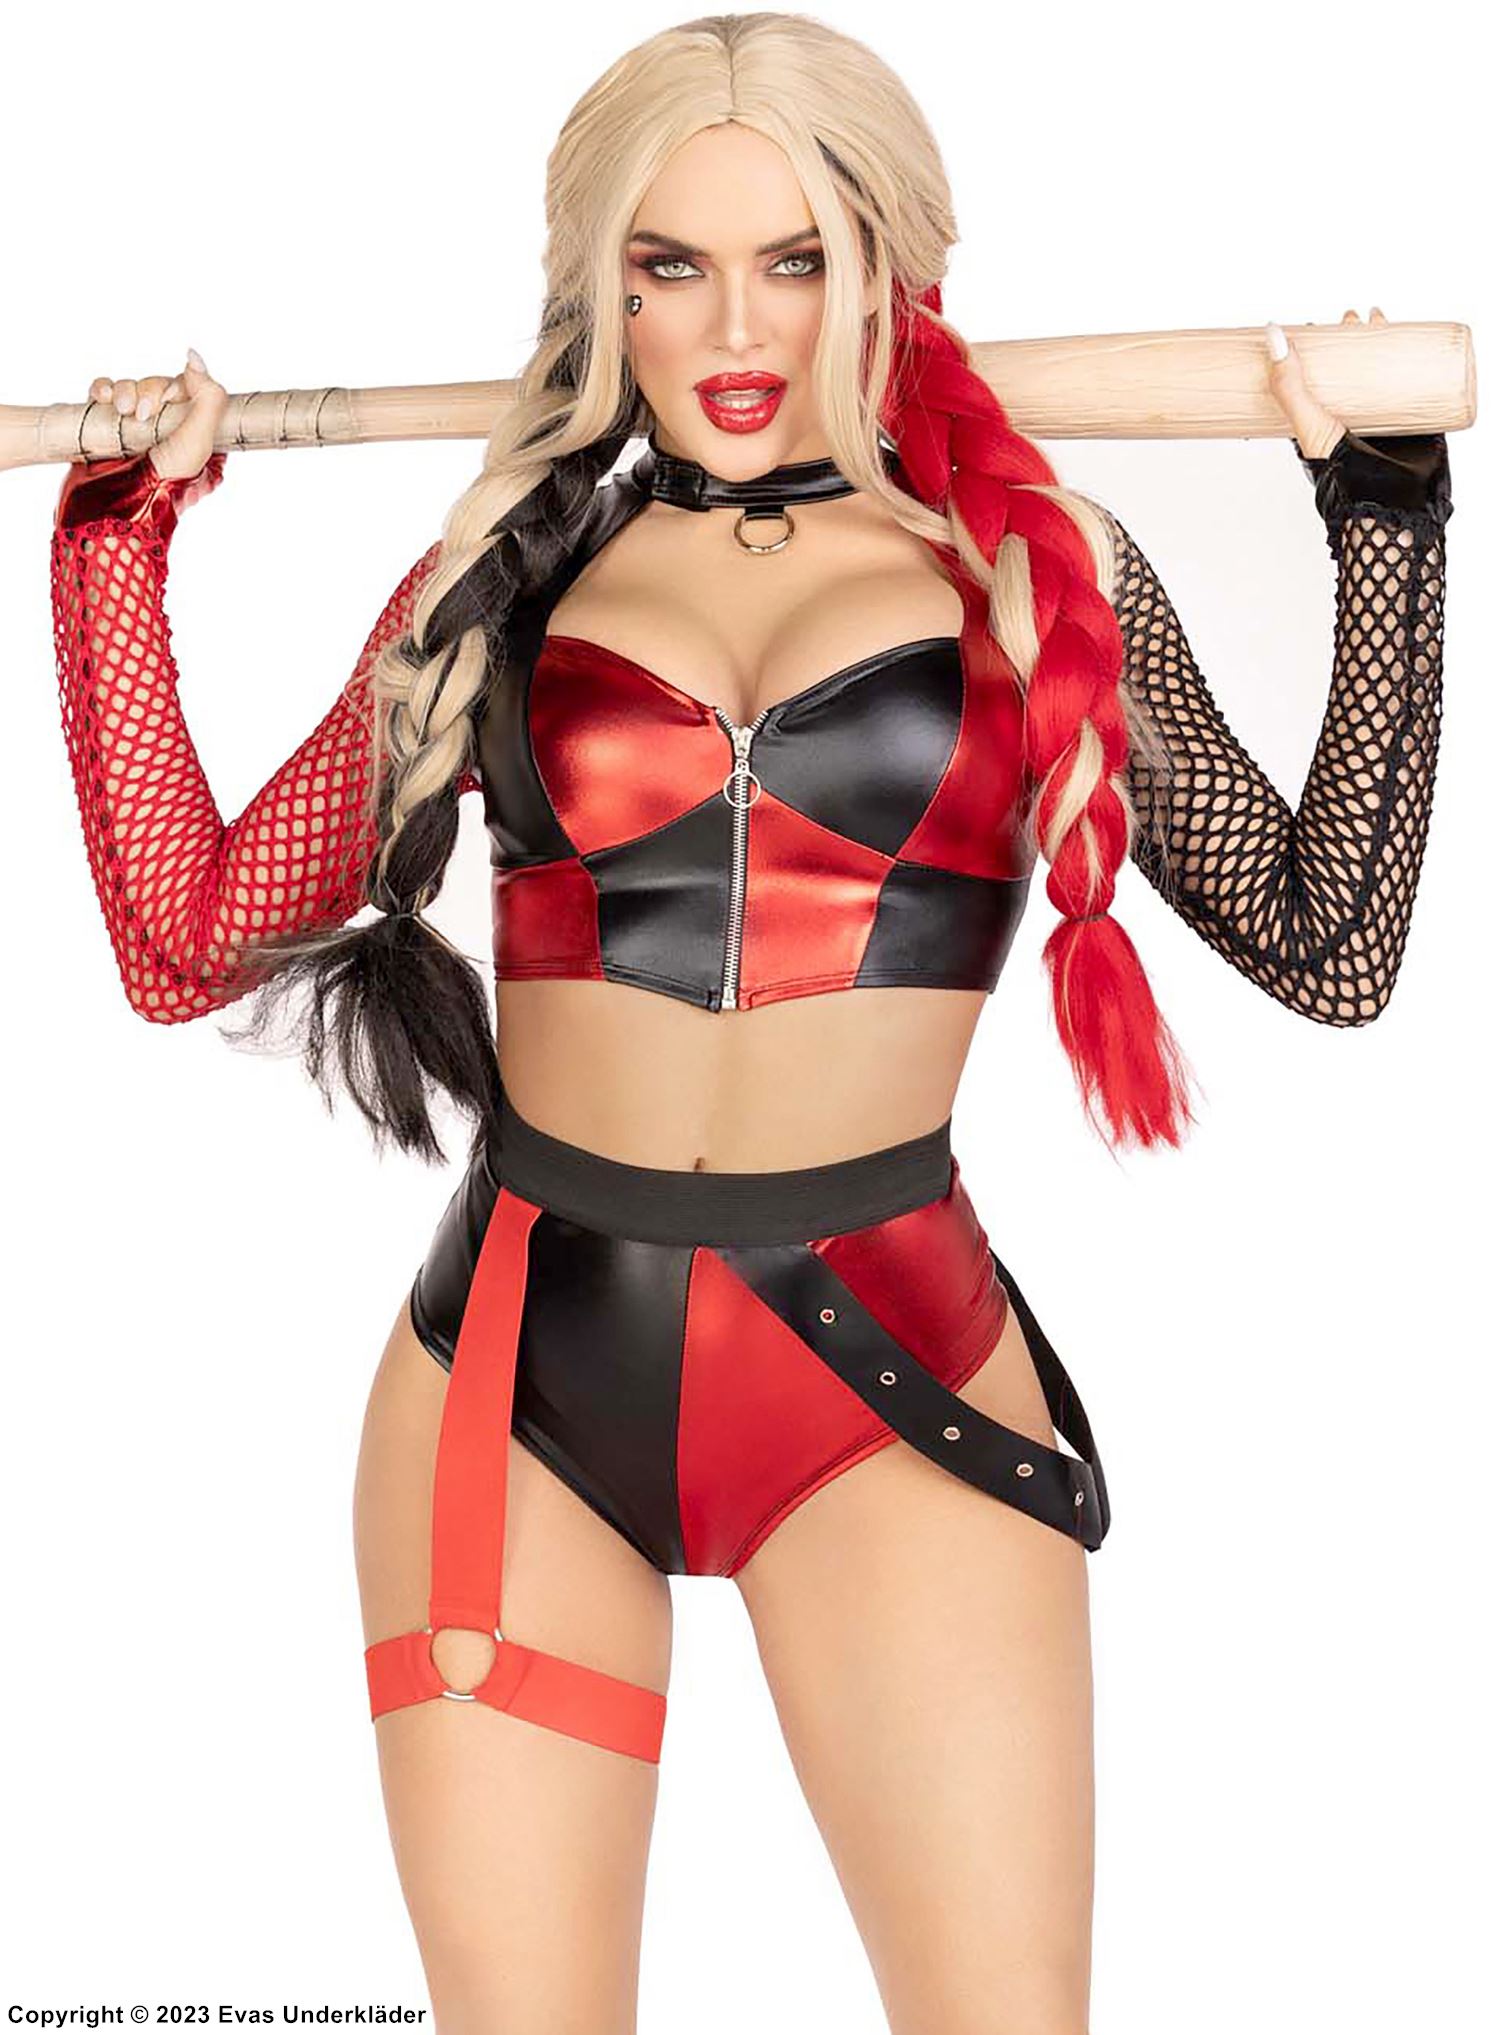 Harley Quinn, top and shorts costume, long sleeves, front zipper, net inlay